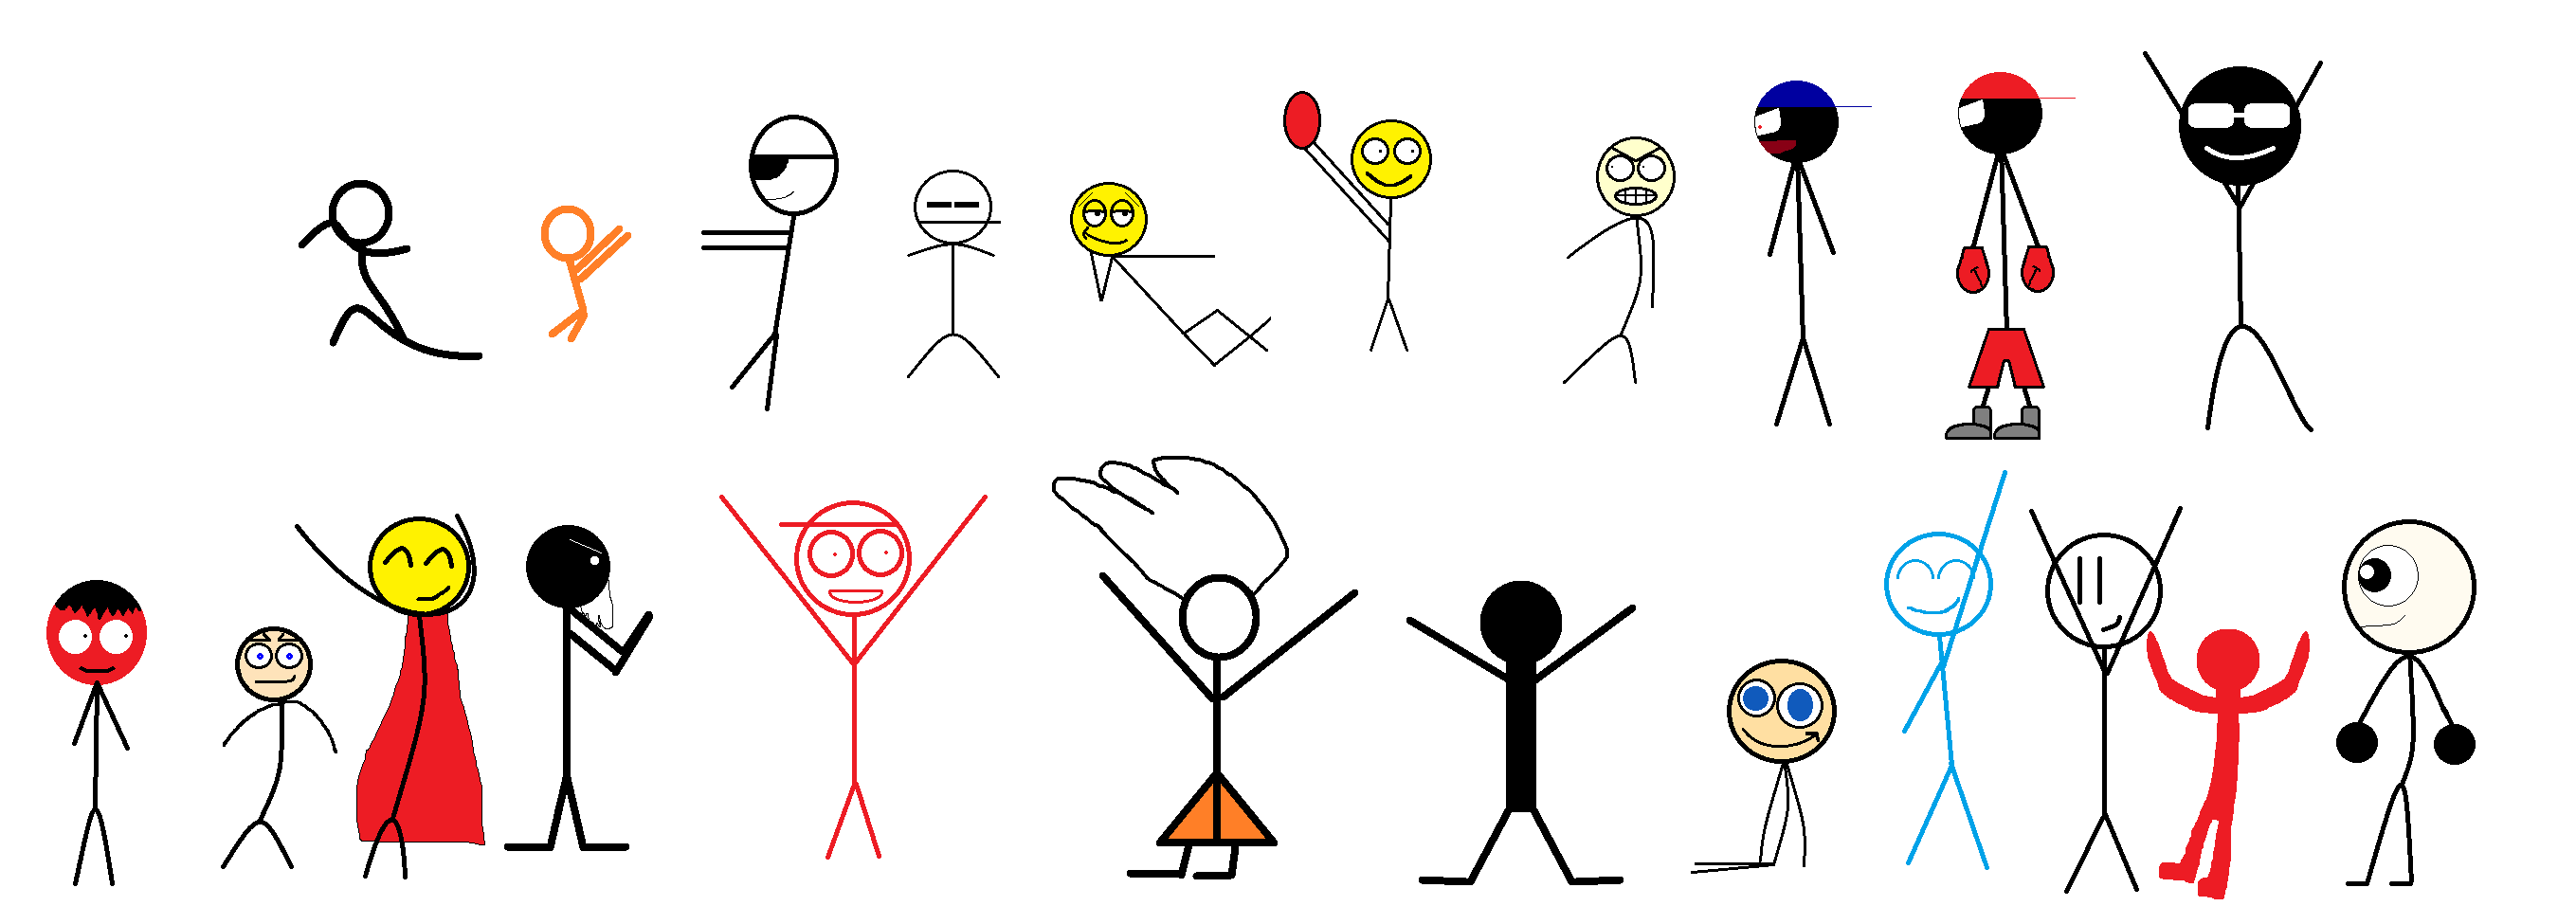 Guitar heroes Stickman Party by Beogi on DeviantArt